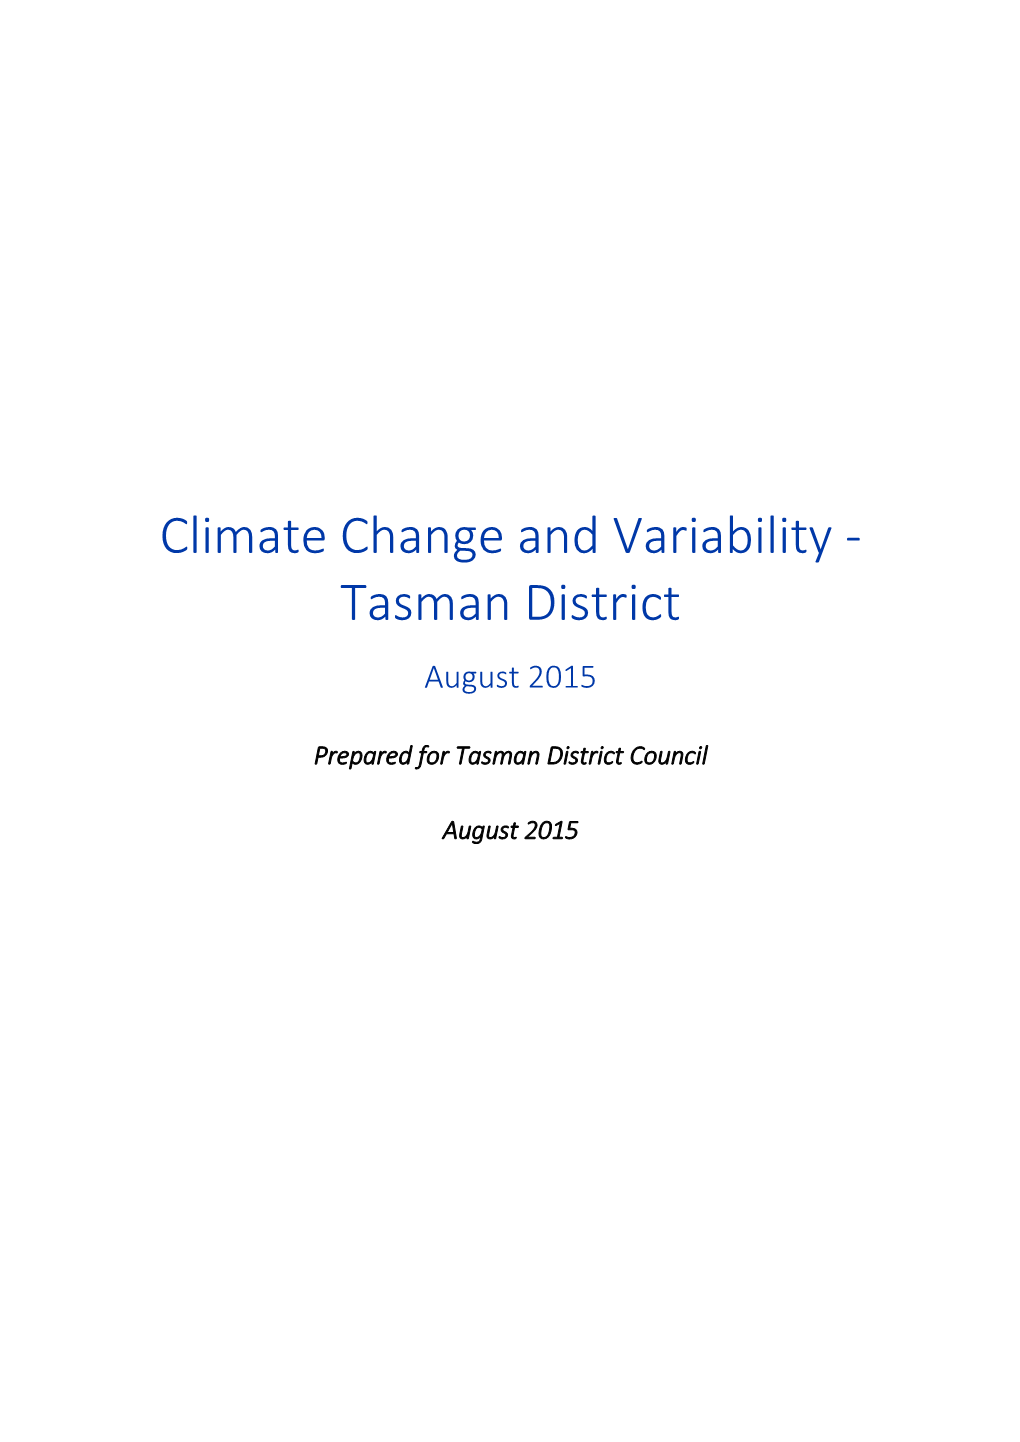 Climate Change and Variability - Tasman District August 2015